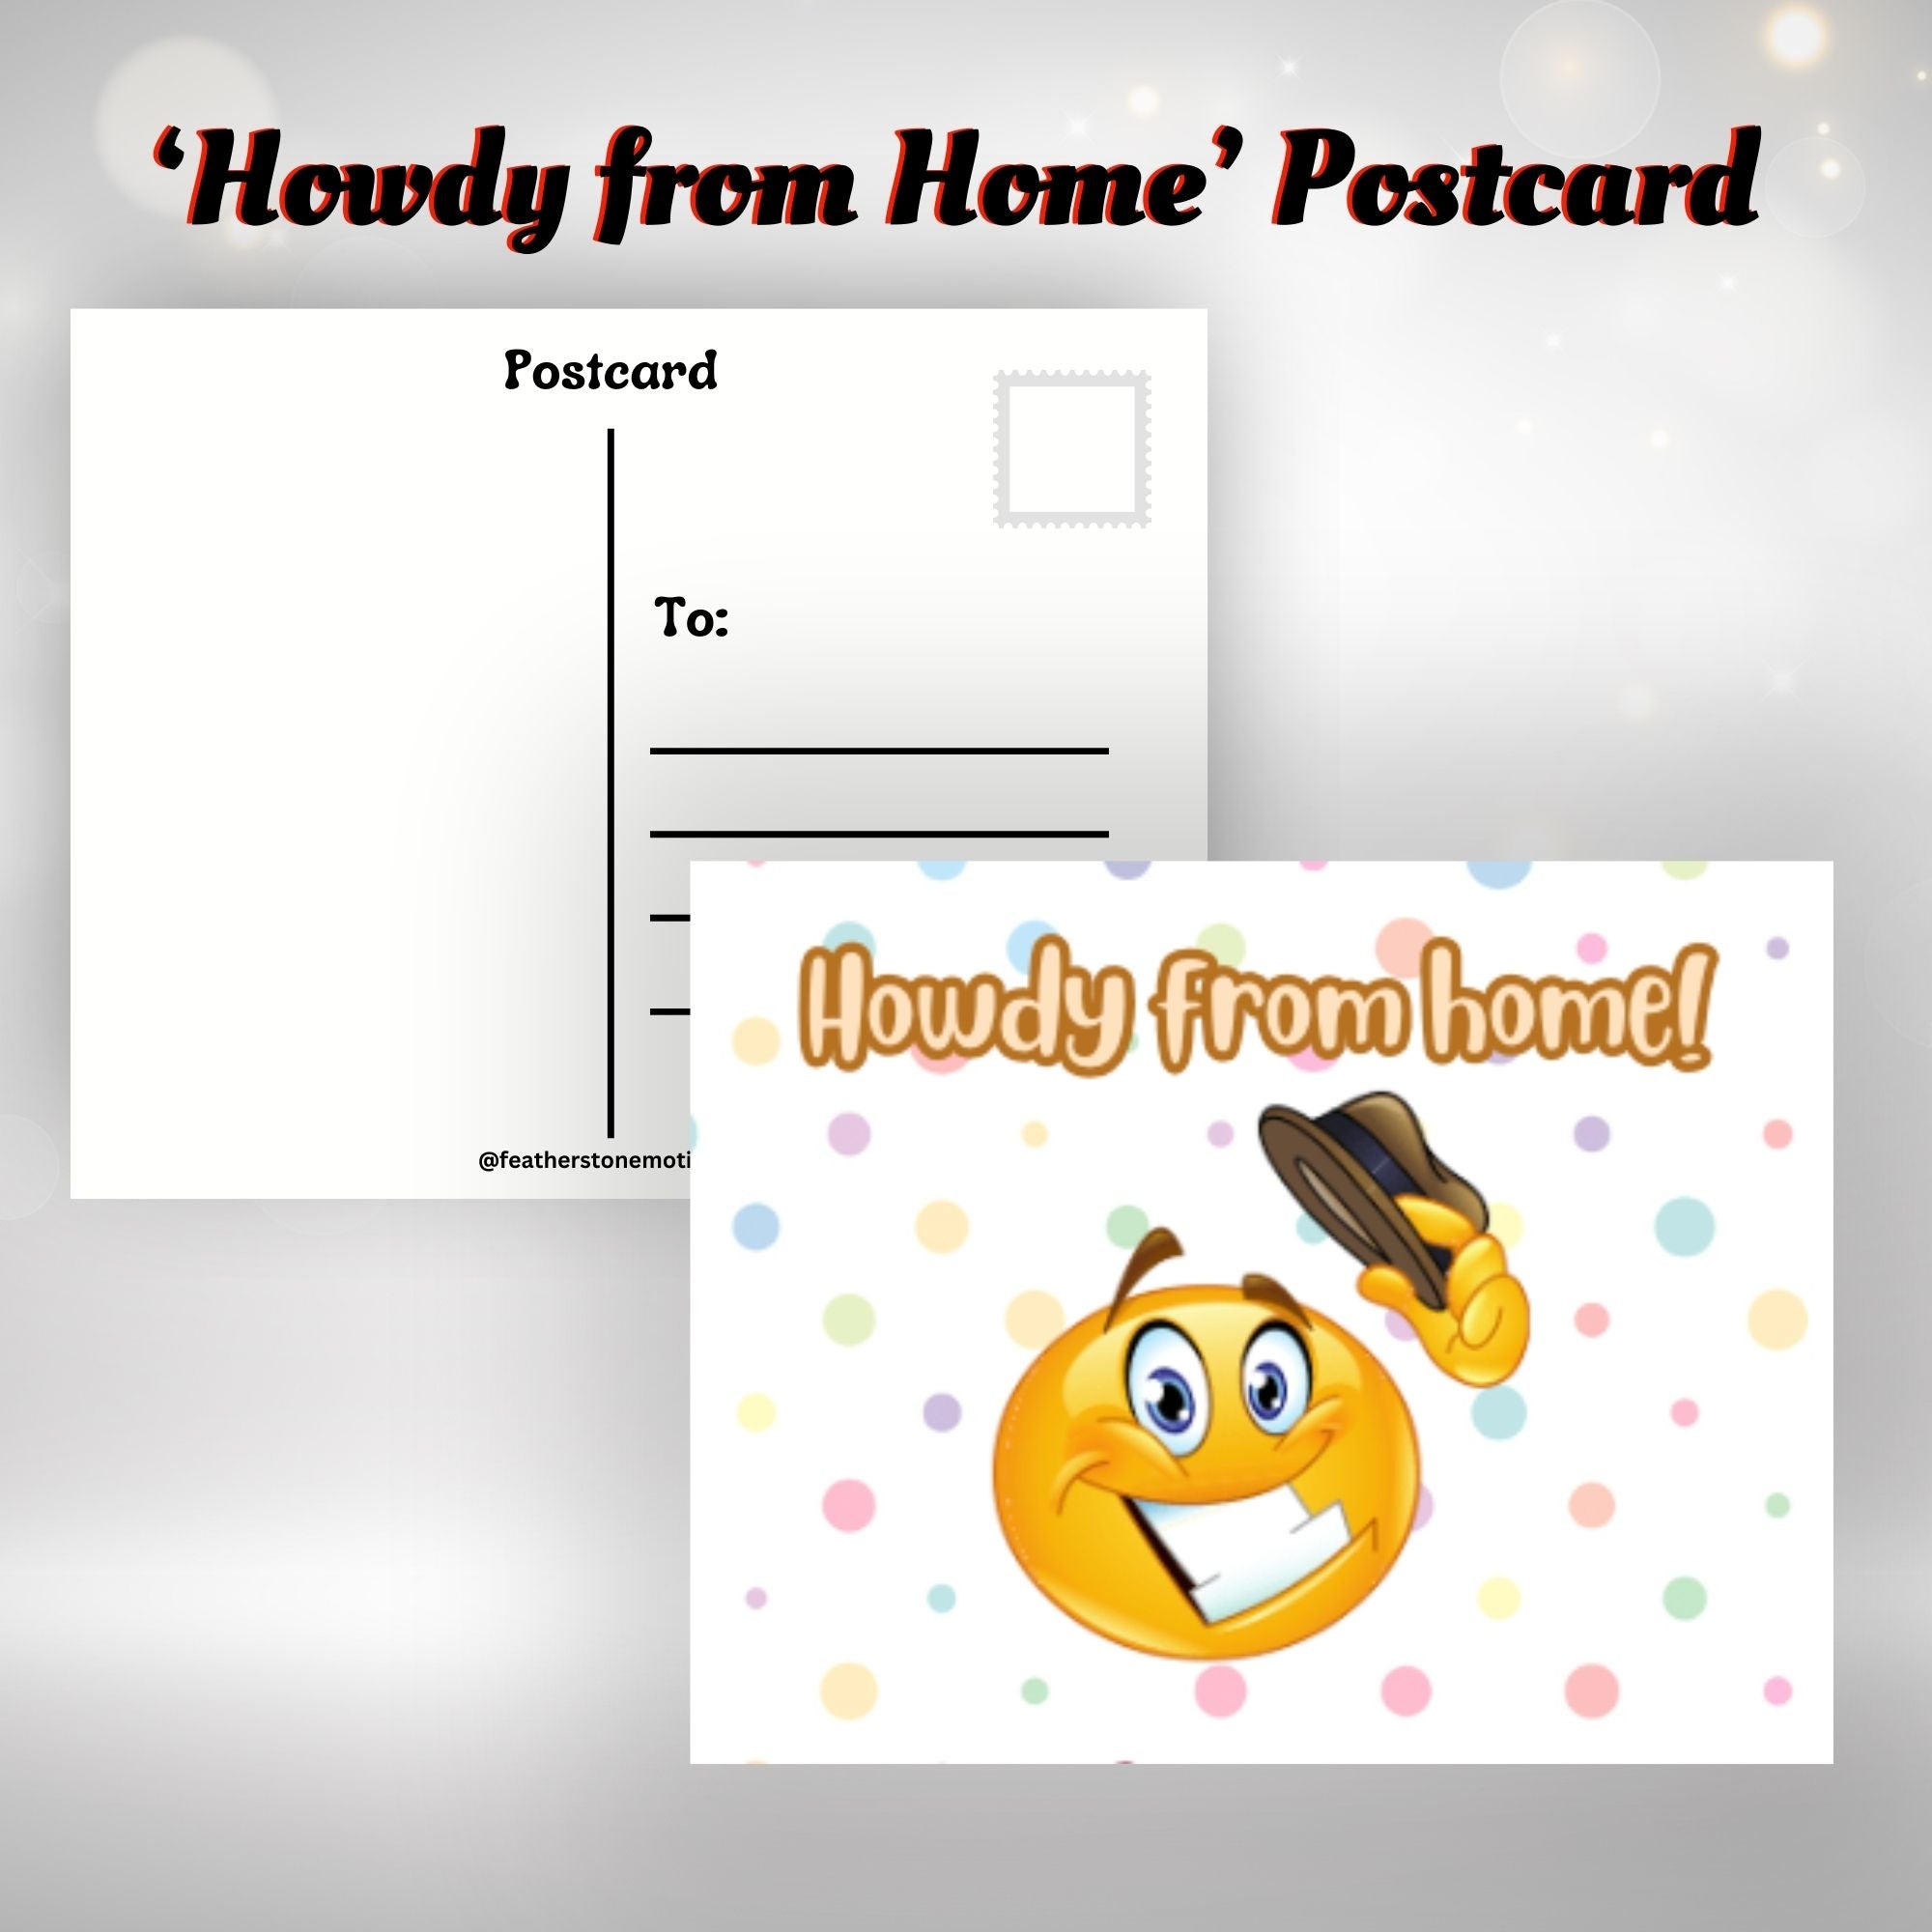 This image shows the Howdy from Home! postcard with a smiley face tipping his hat.